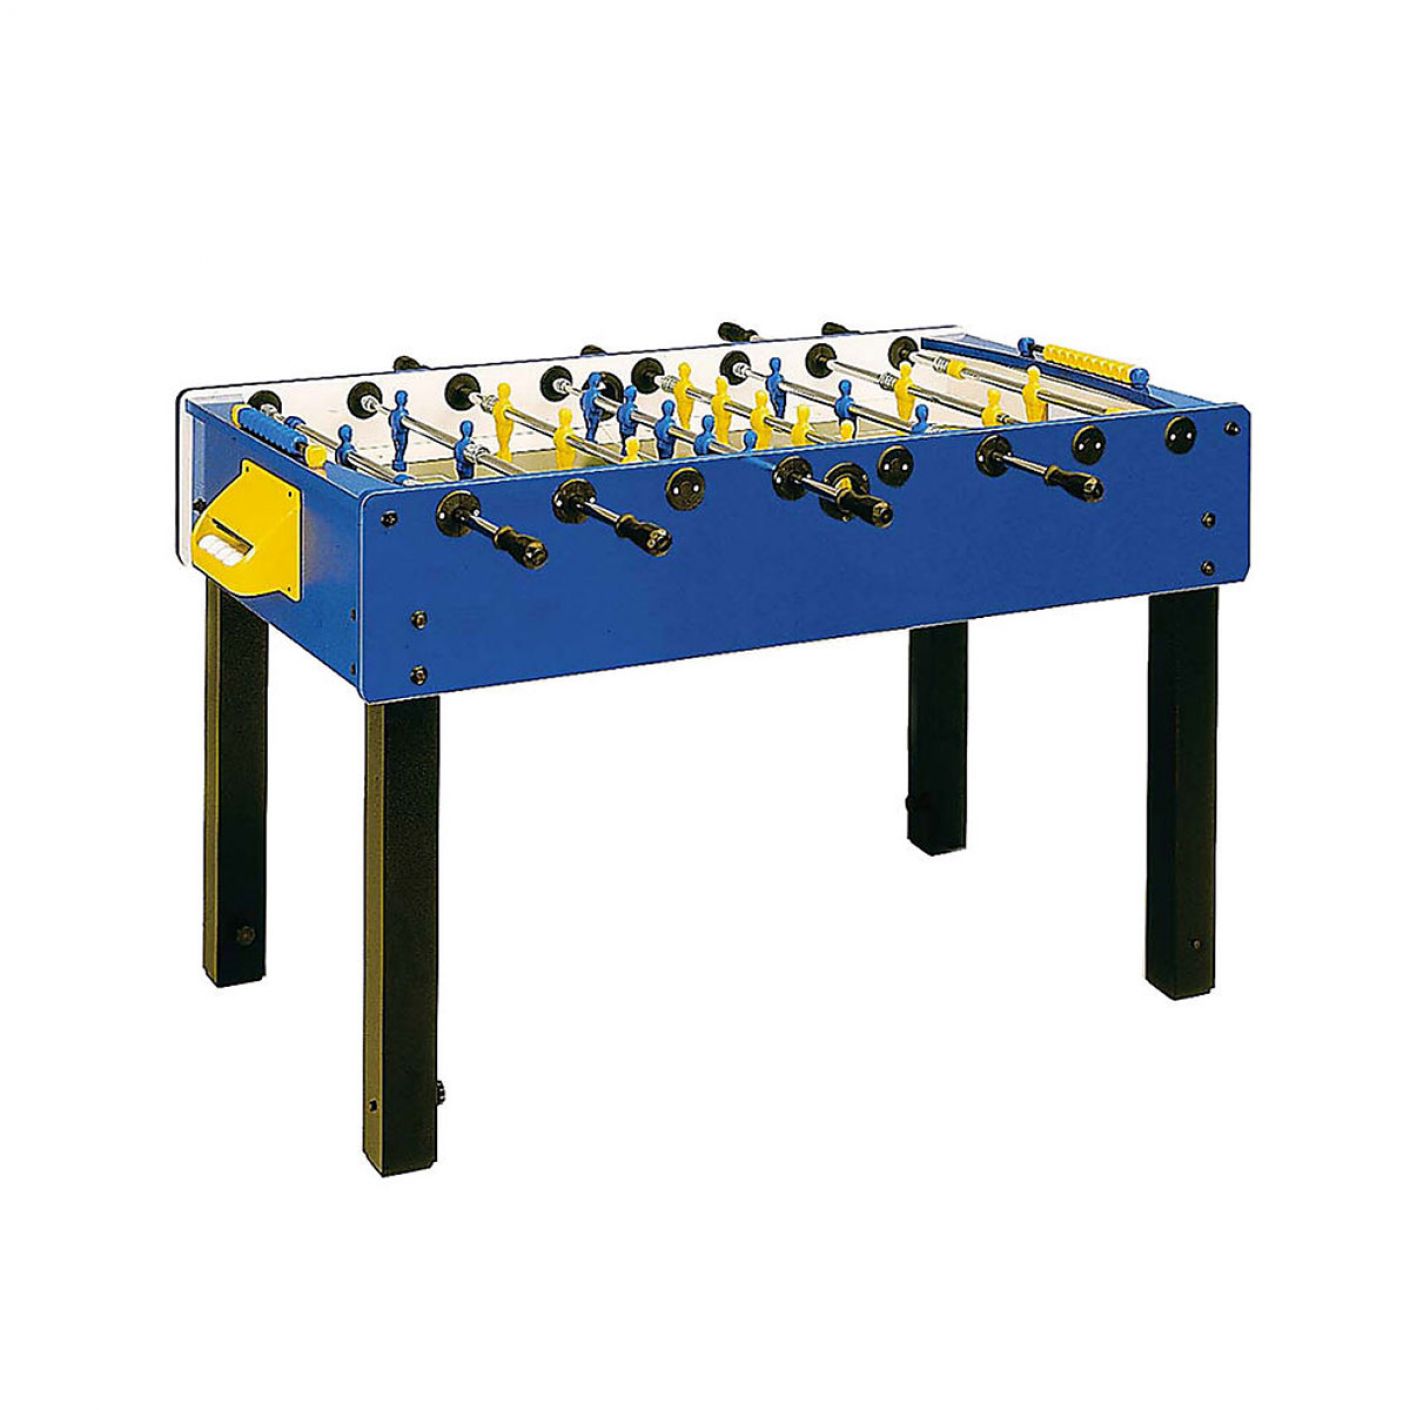 Garlando Football Table G-100 blue with outgoing temples